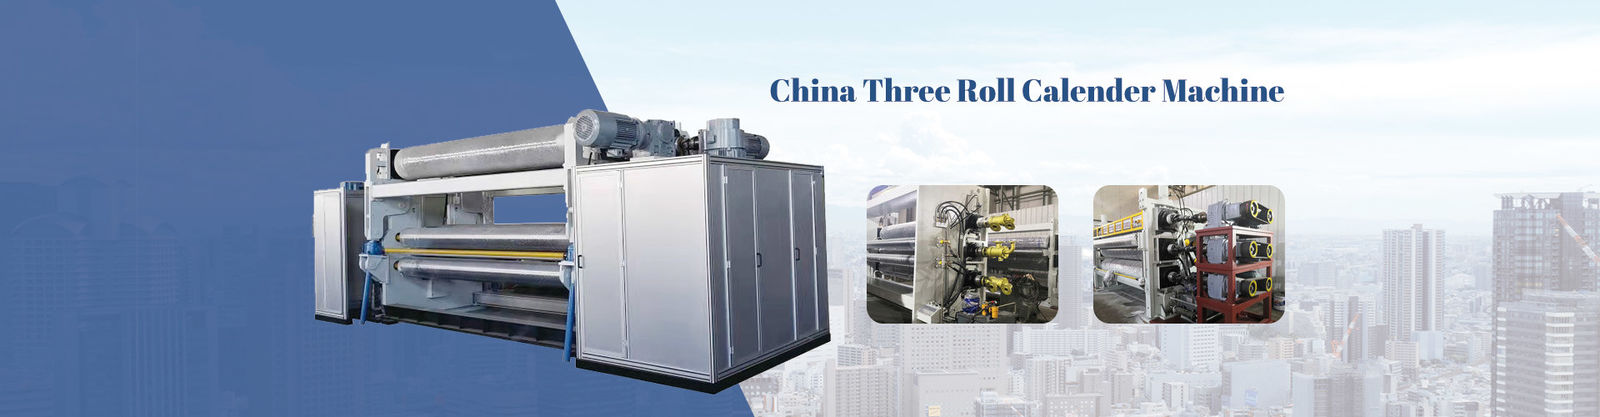 quality Two Roll Calender Machine factory